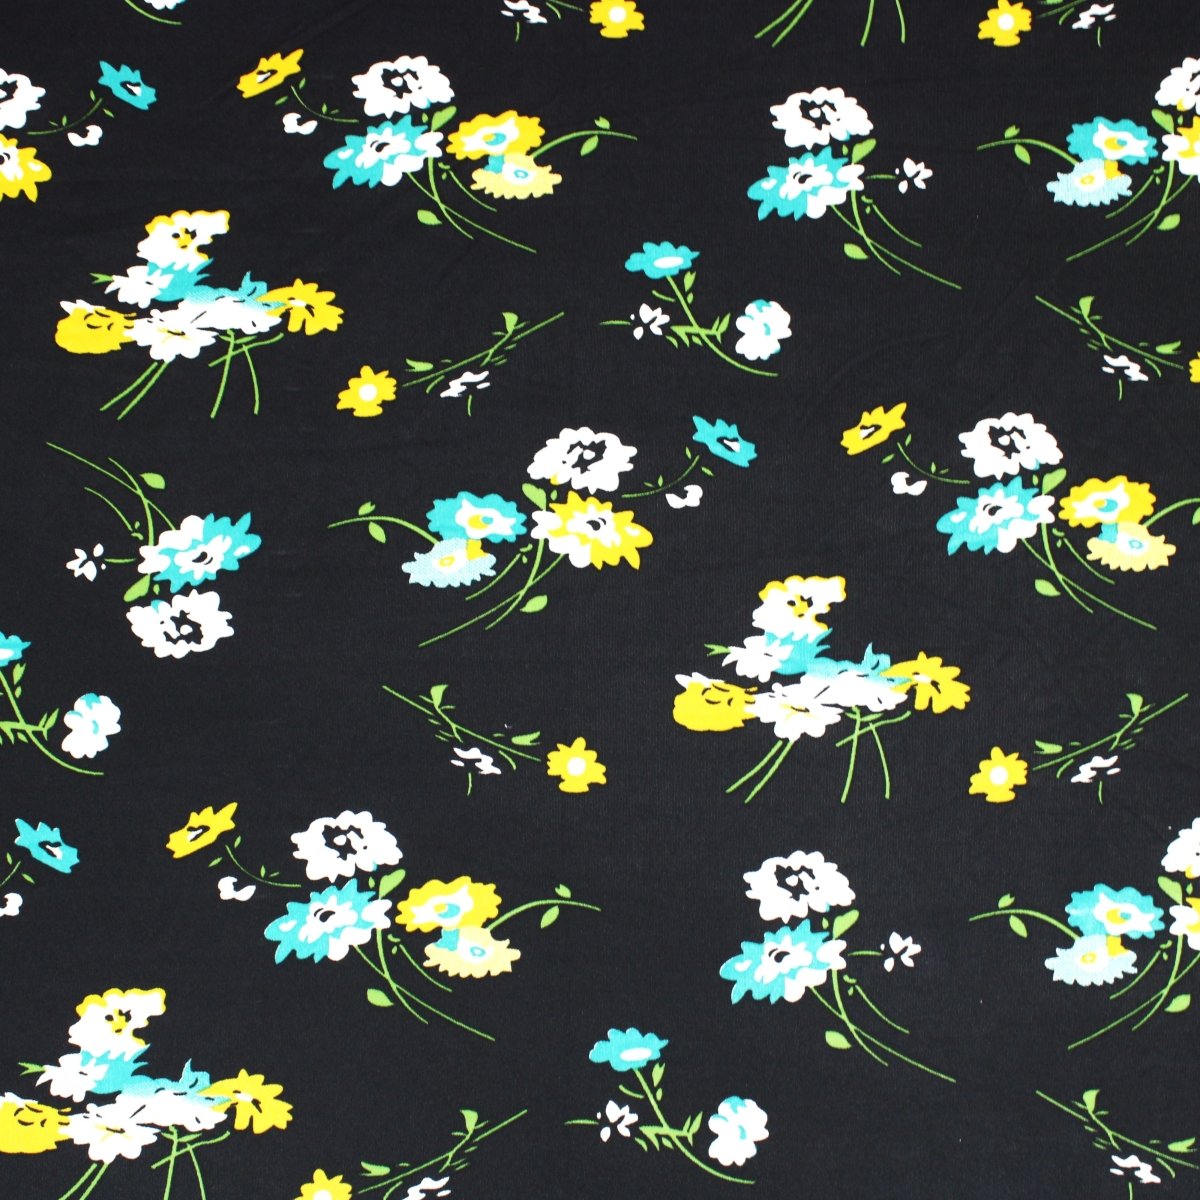 3 Metres Super Soft Polyester Jersey- 55" Wide (Black & Teal) - Pound A Metre